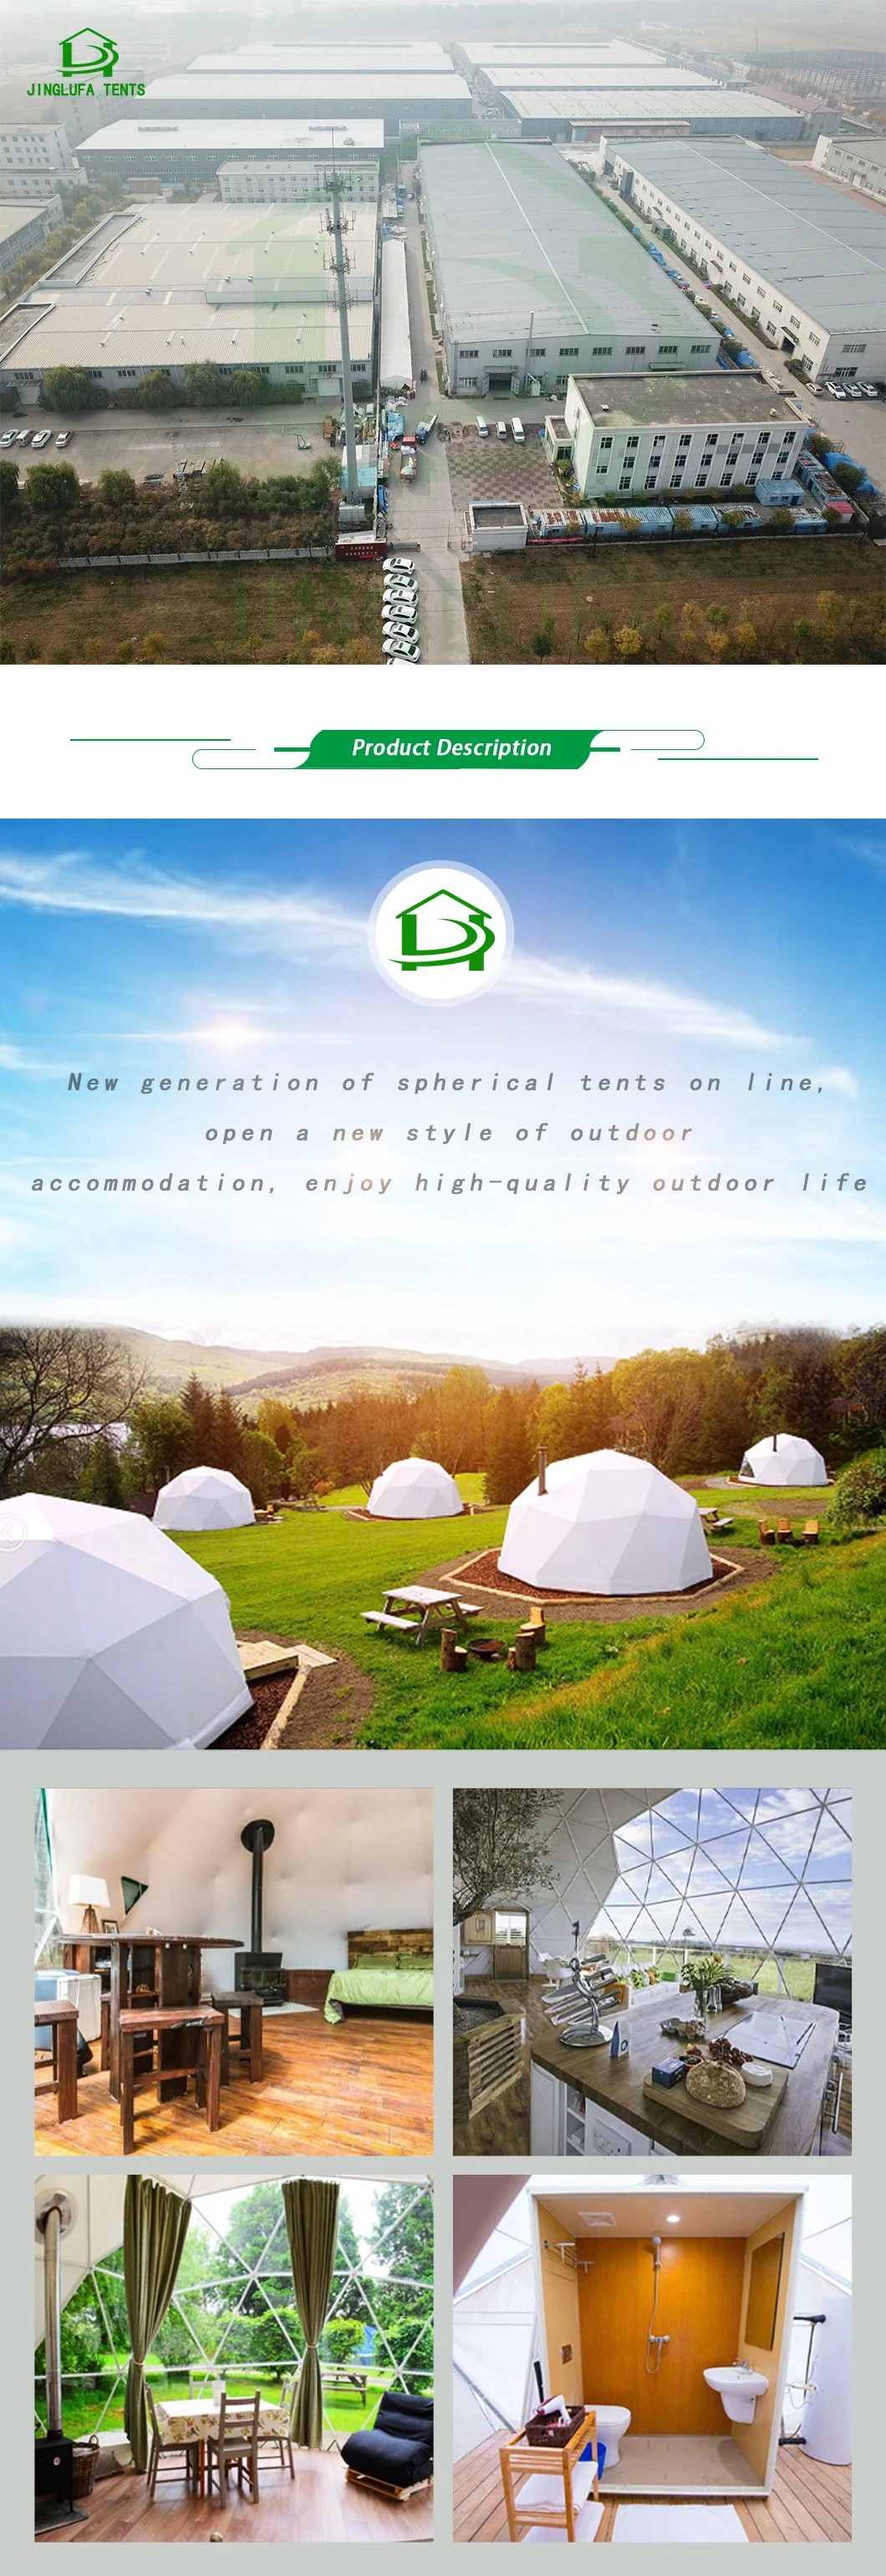 Sun Shelter Waterproof UV Resistant Fabric PVC Beach Dome Tents